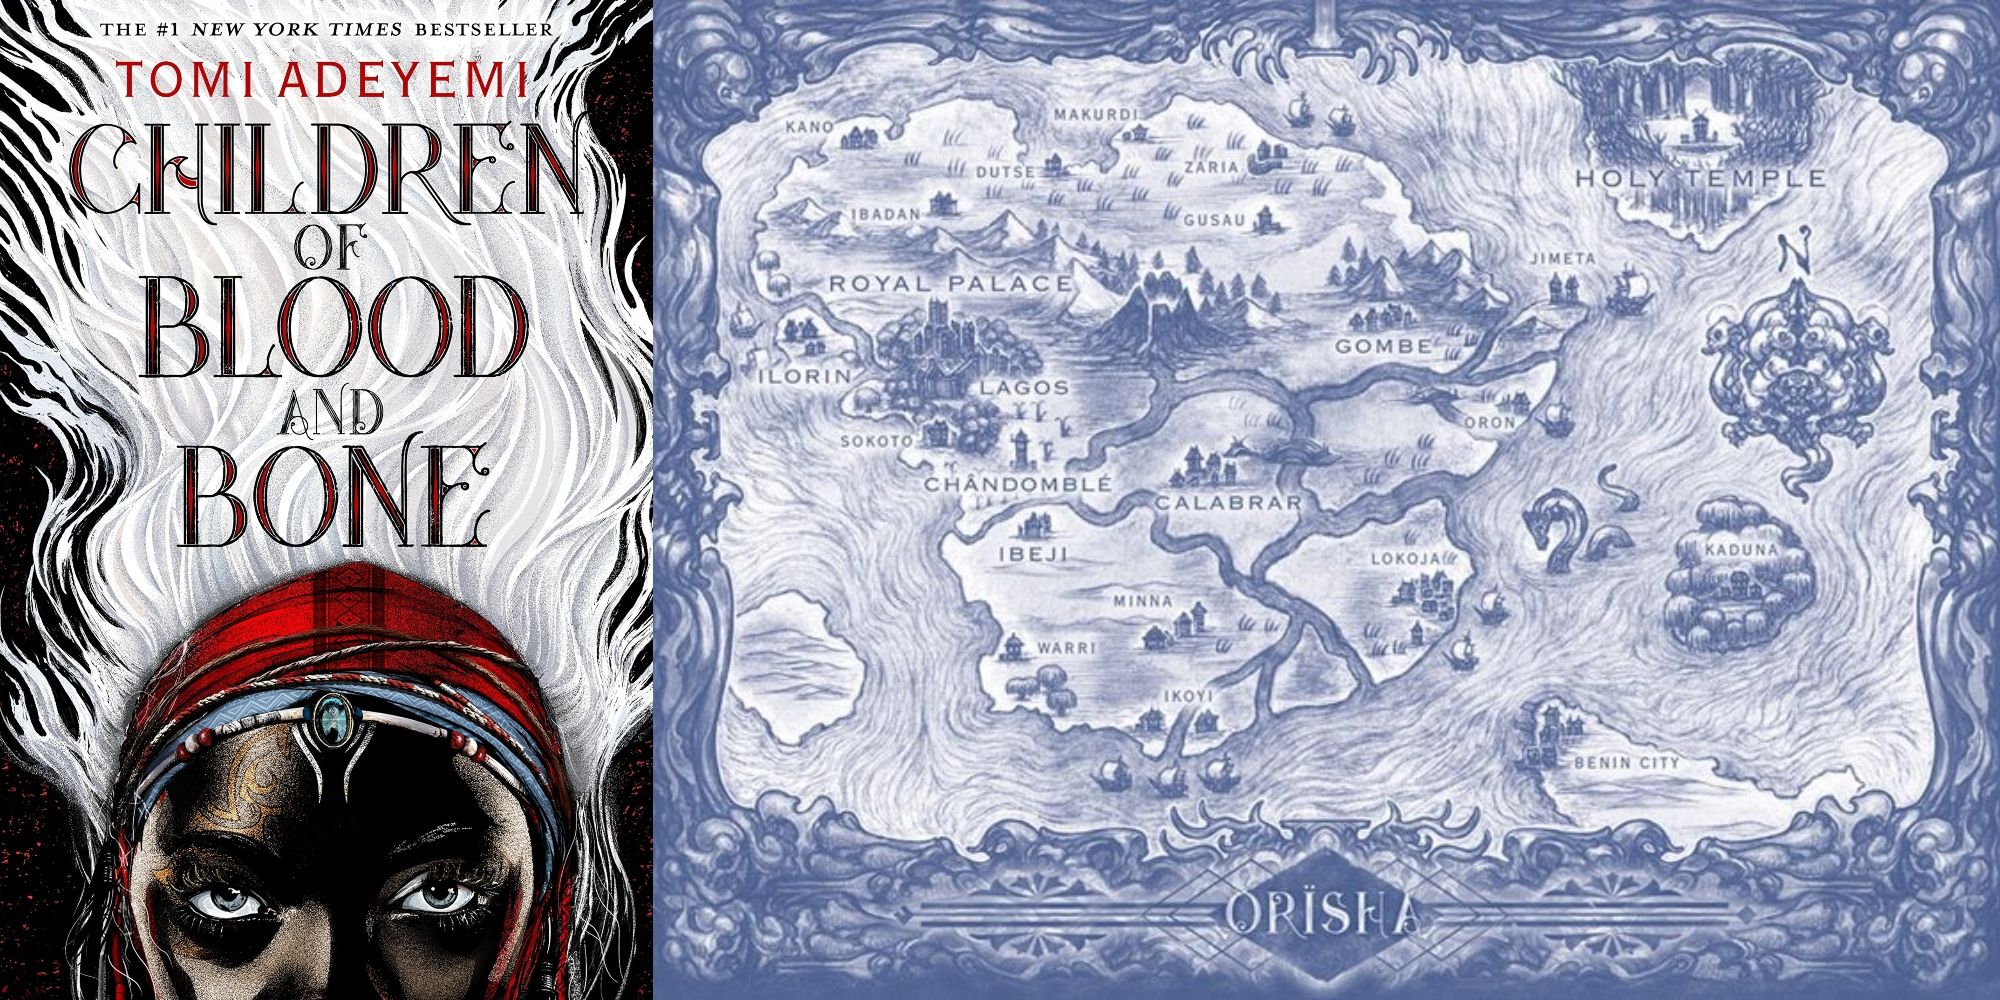 Split image: The book cover of Children of Blood and Bone, a map of Orisha from Children of Blood and Bone.